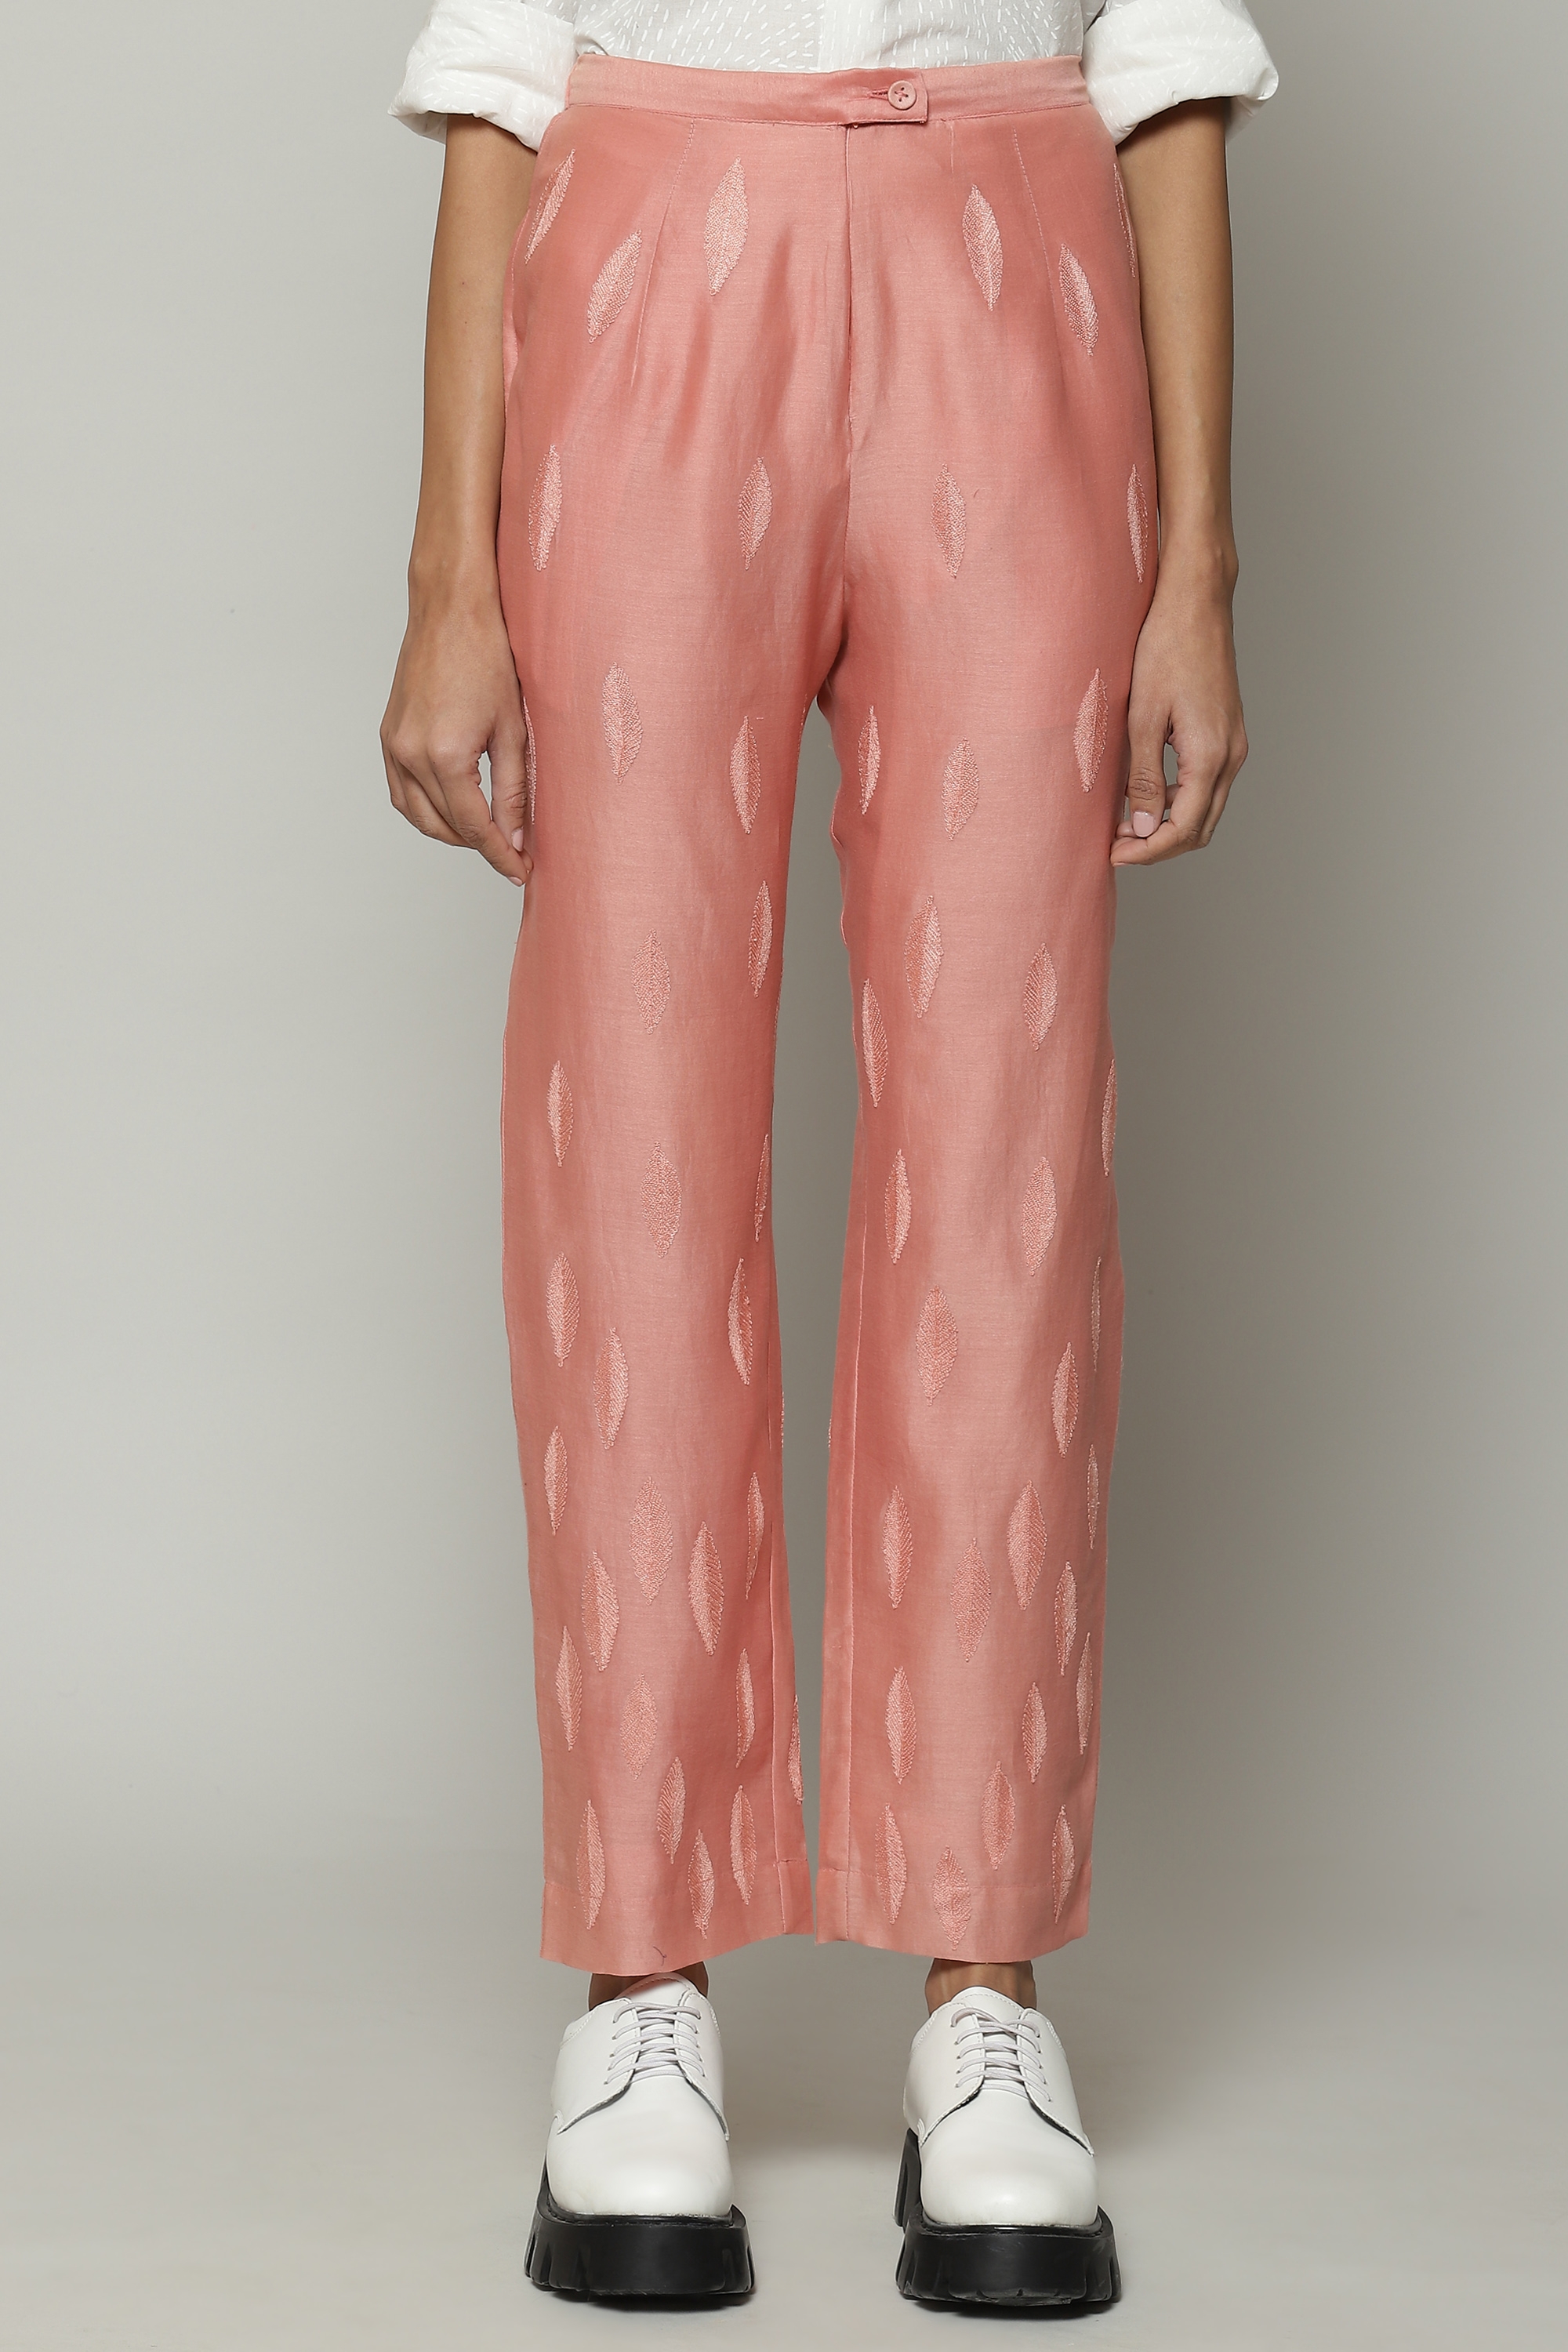 ABRAHAM AND THAKORE | Scattered Leaf Crewel Embroidered Silk Cotton Pant